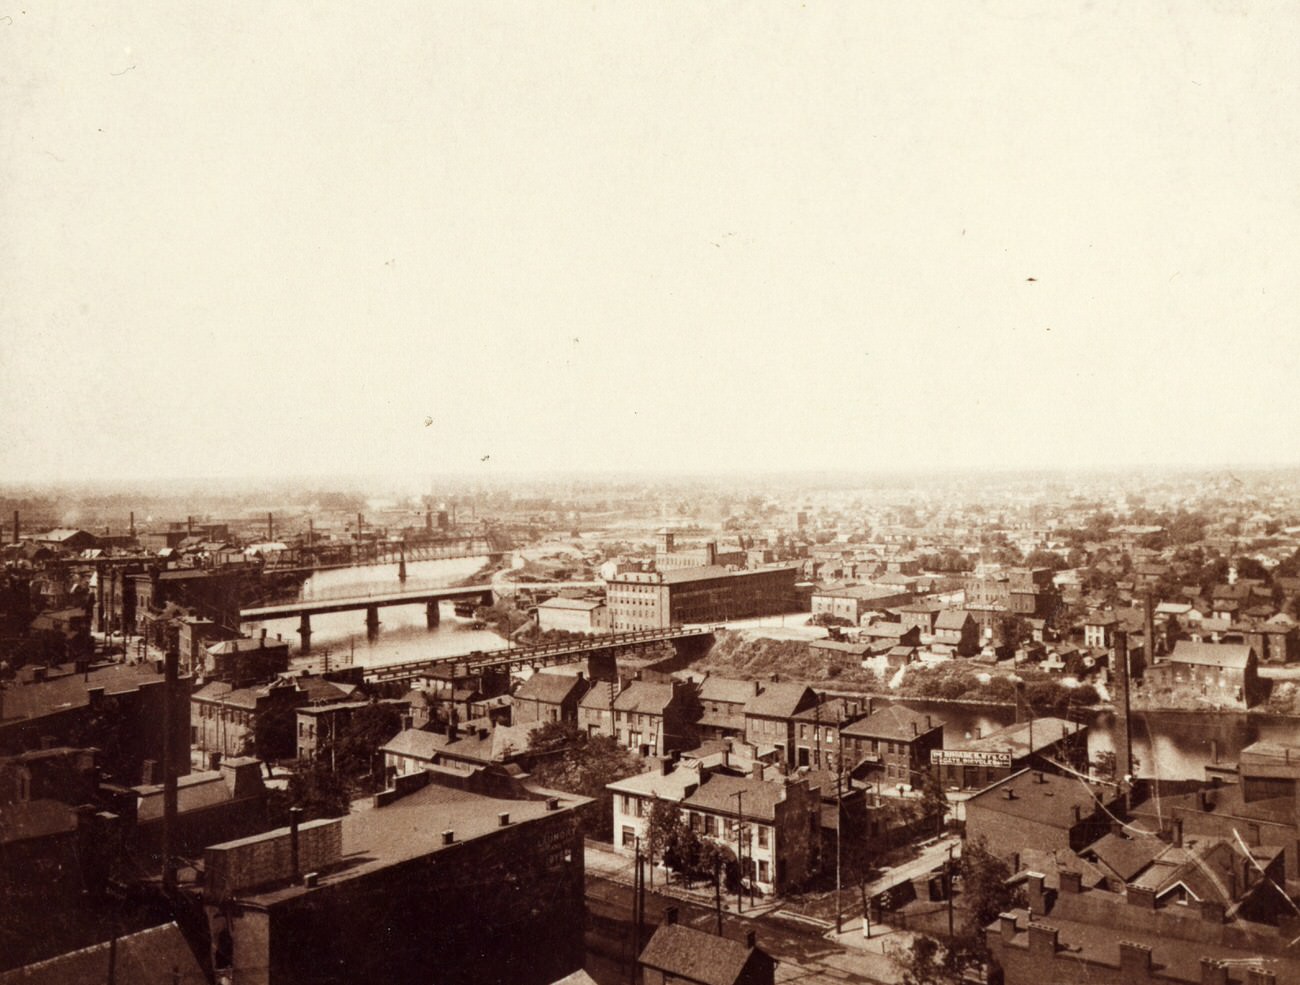 Aerial view of downtown Columbus looking southwest across the Scioto River, late 1880s or early 1890s.